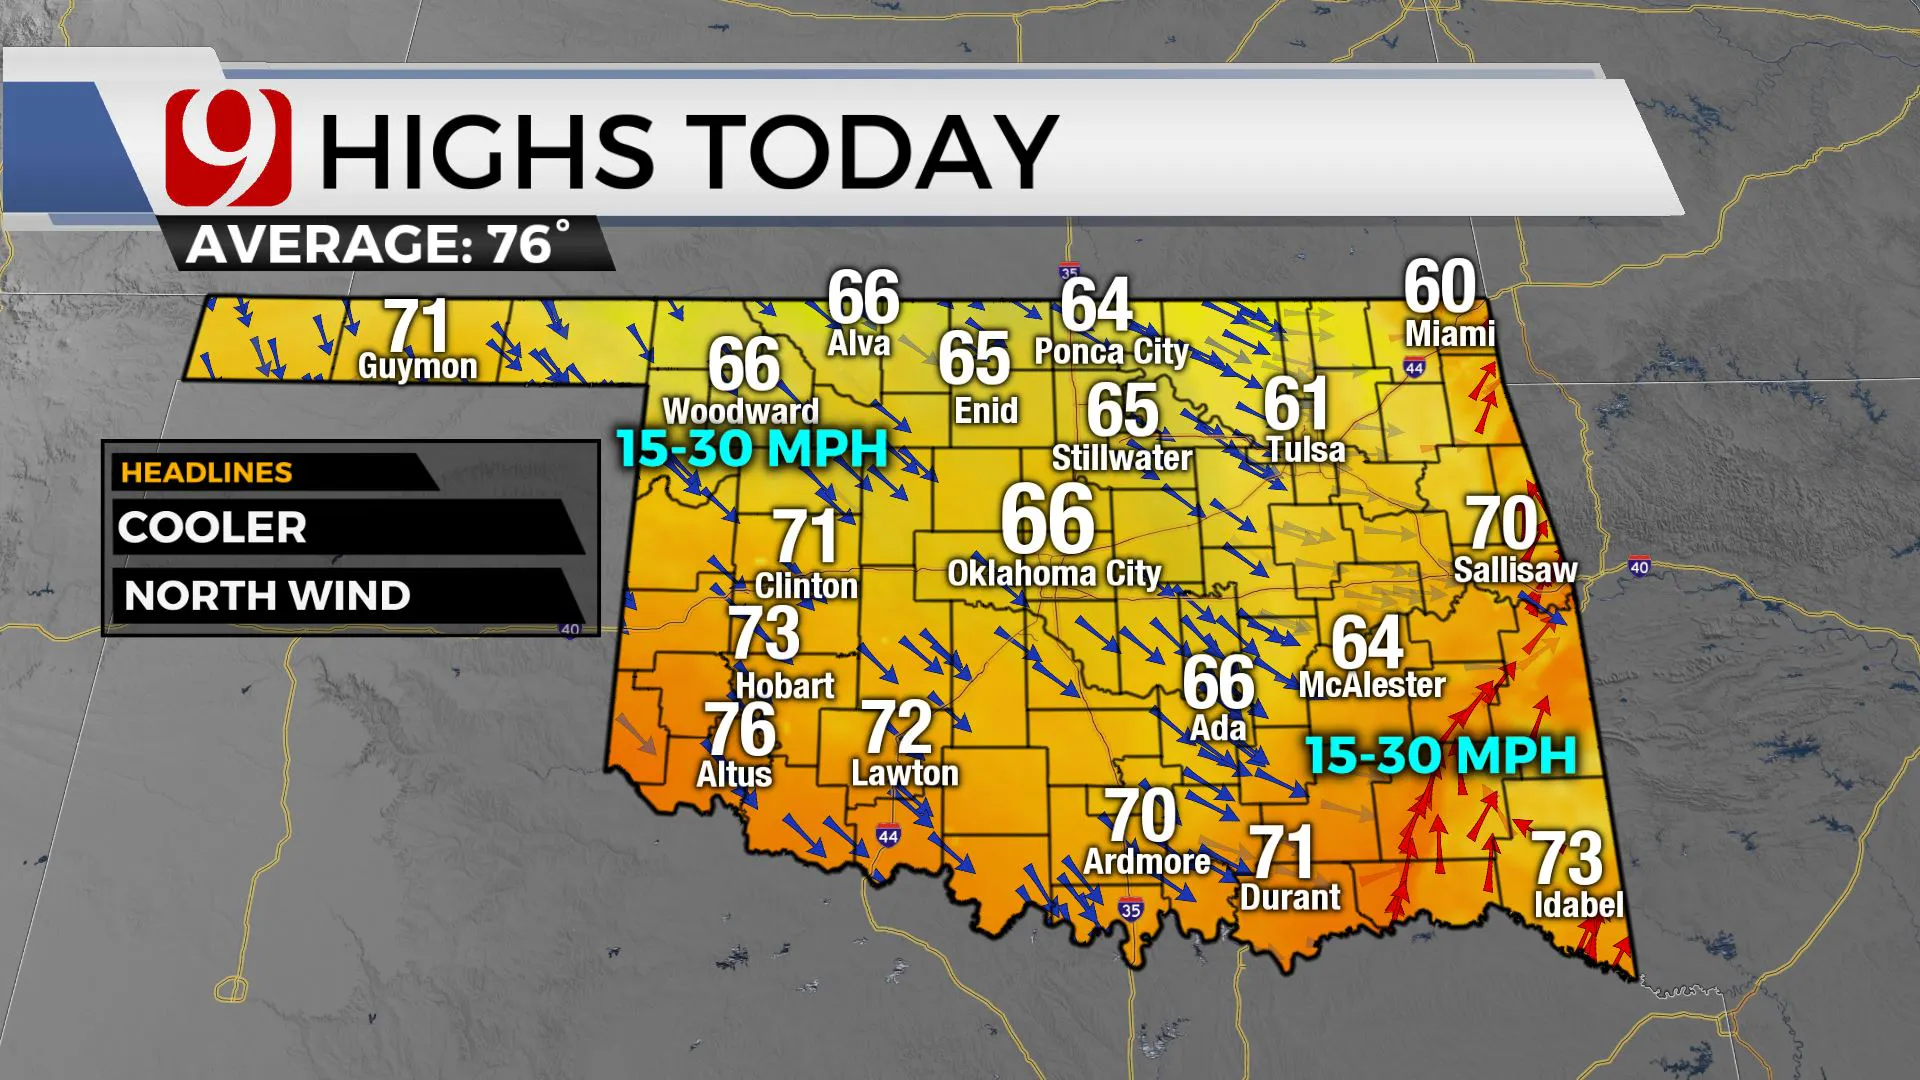 HIGHS TODAY